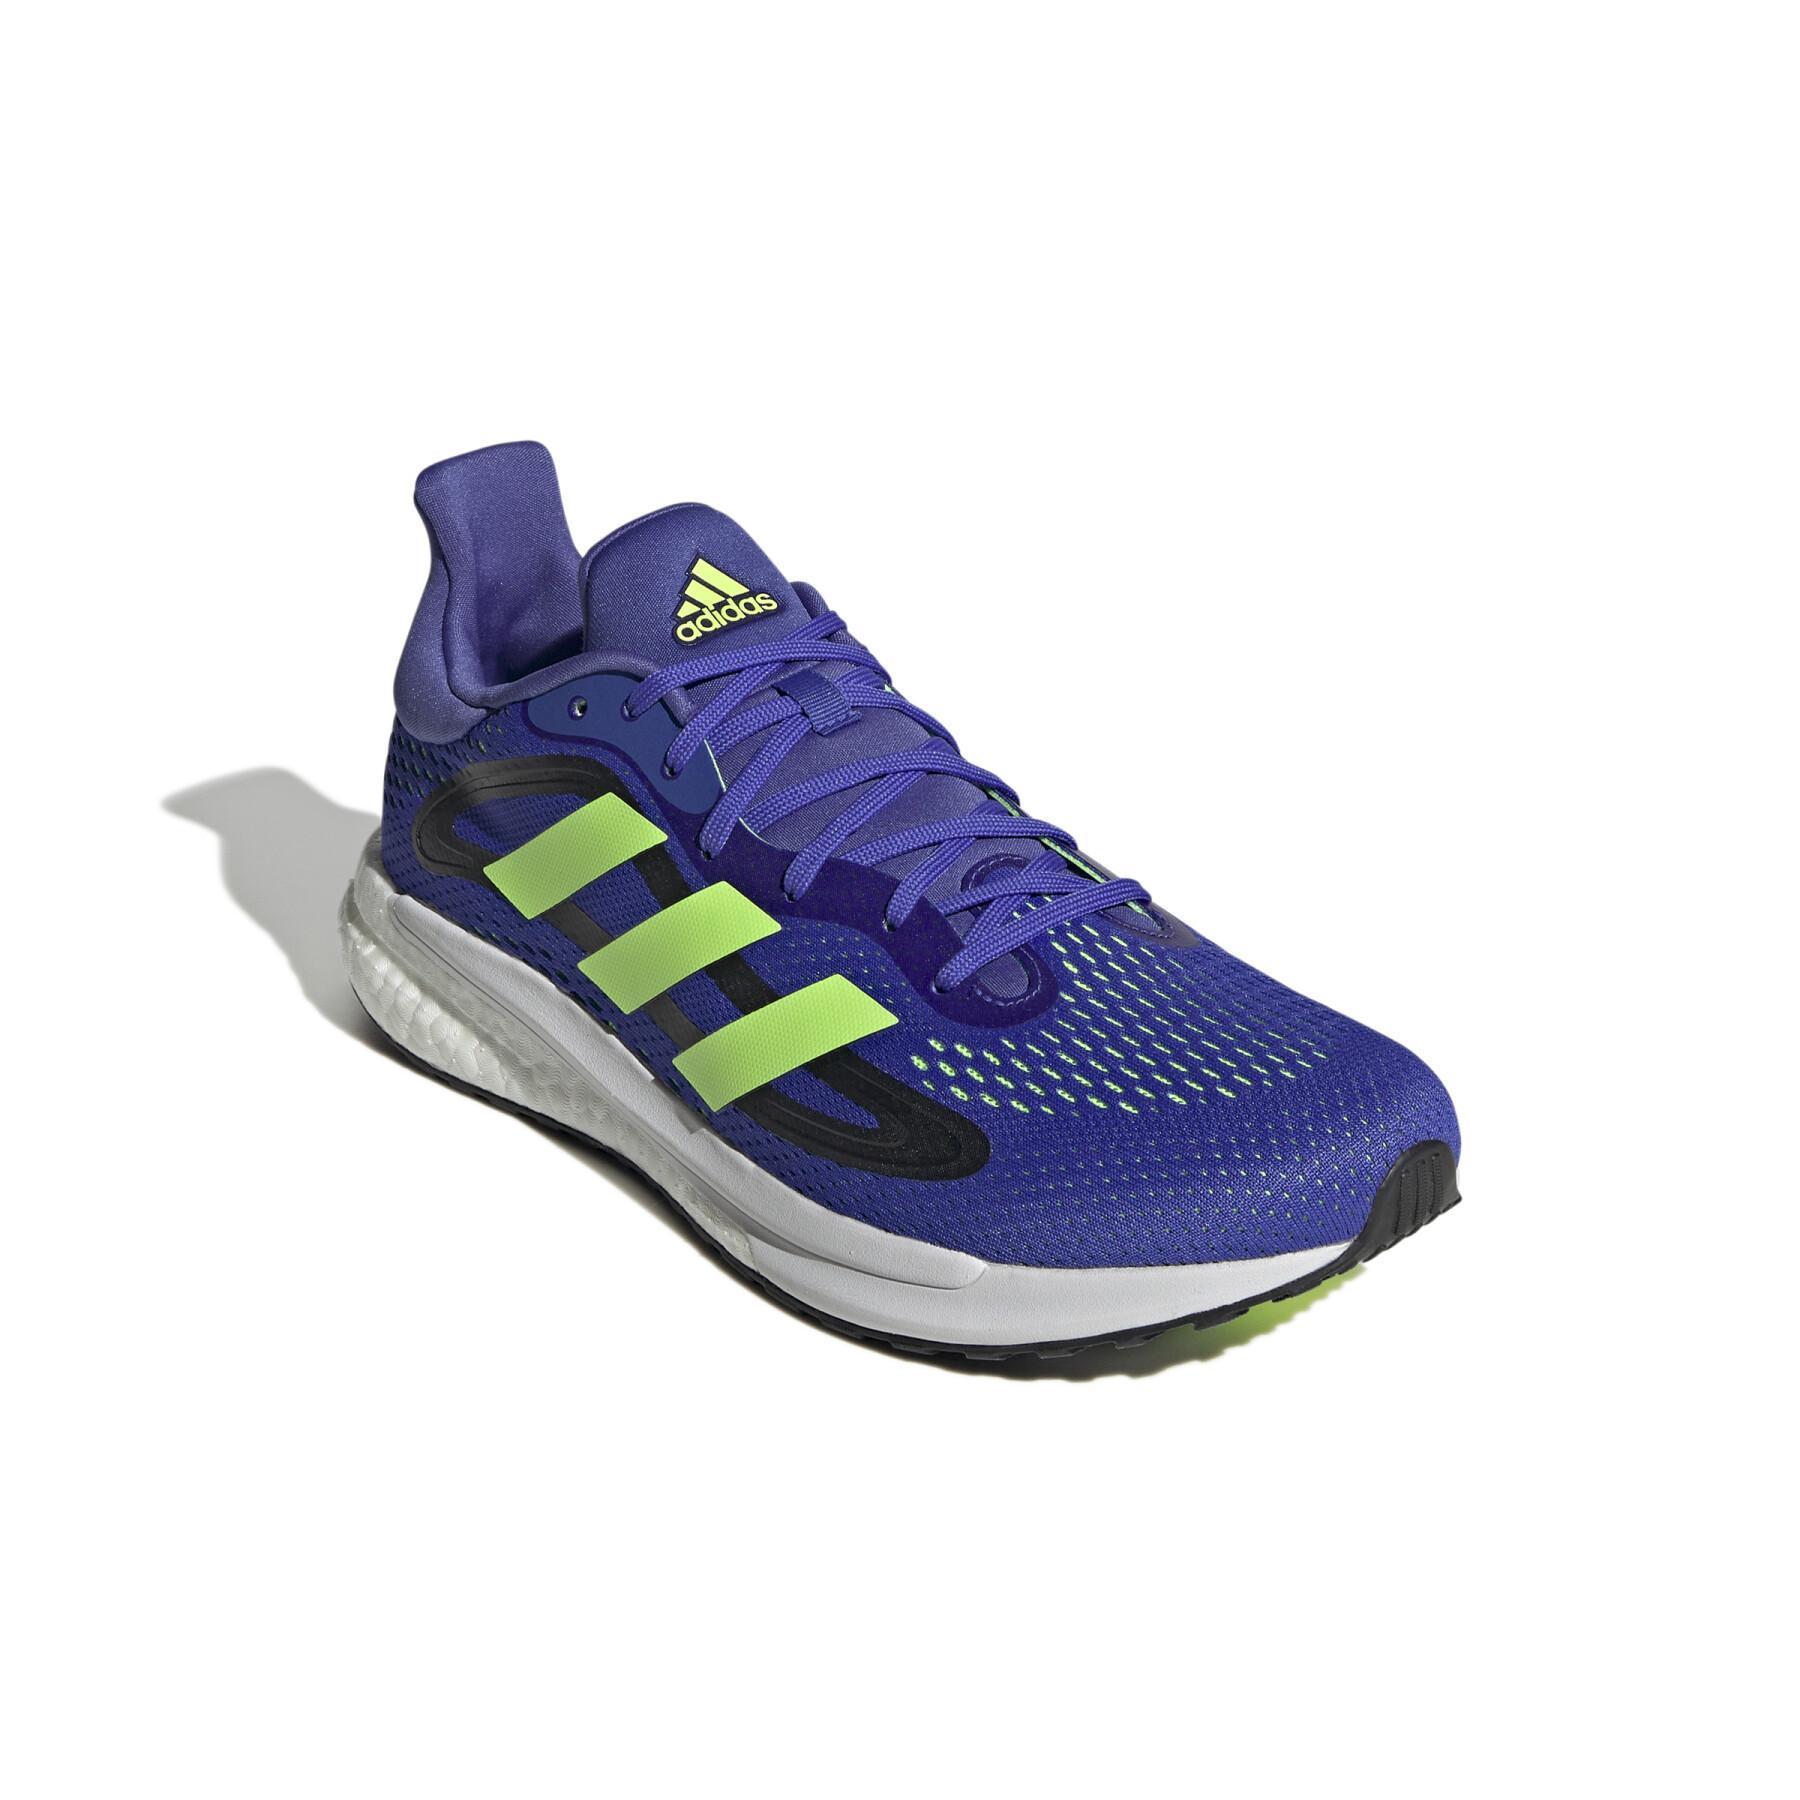 Running shoes adidas SolarGlide 4